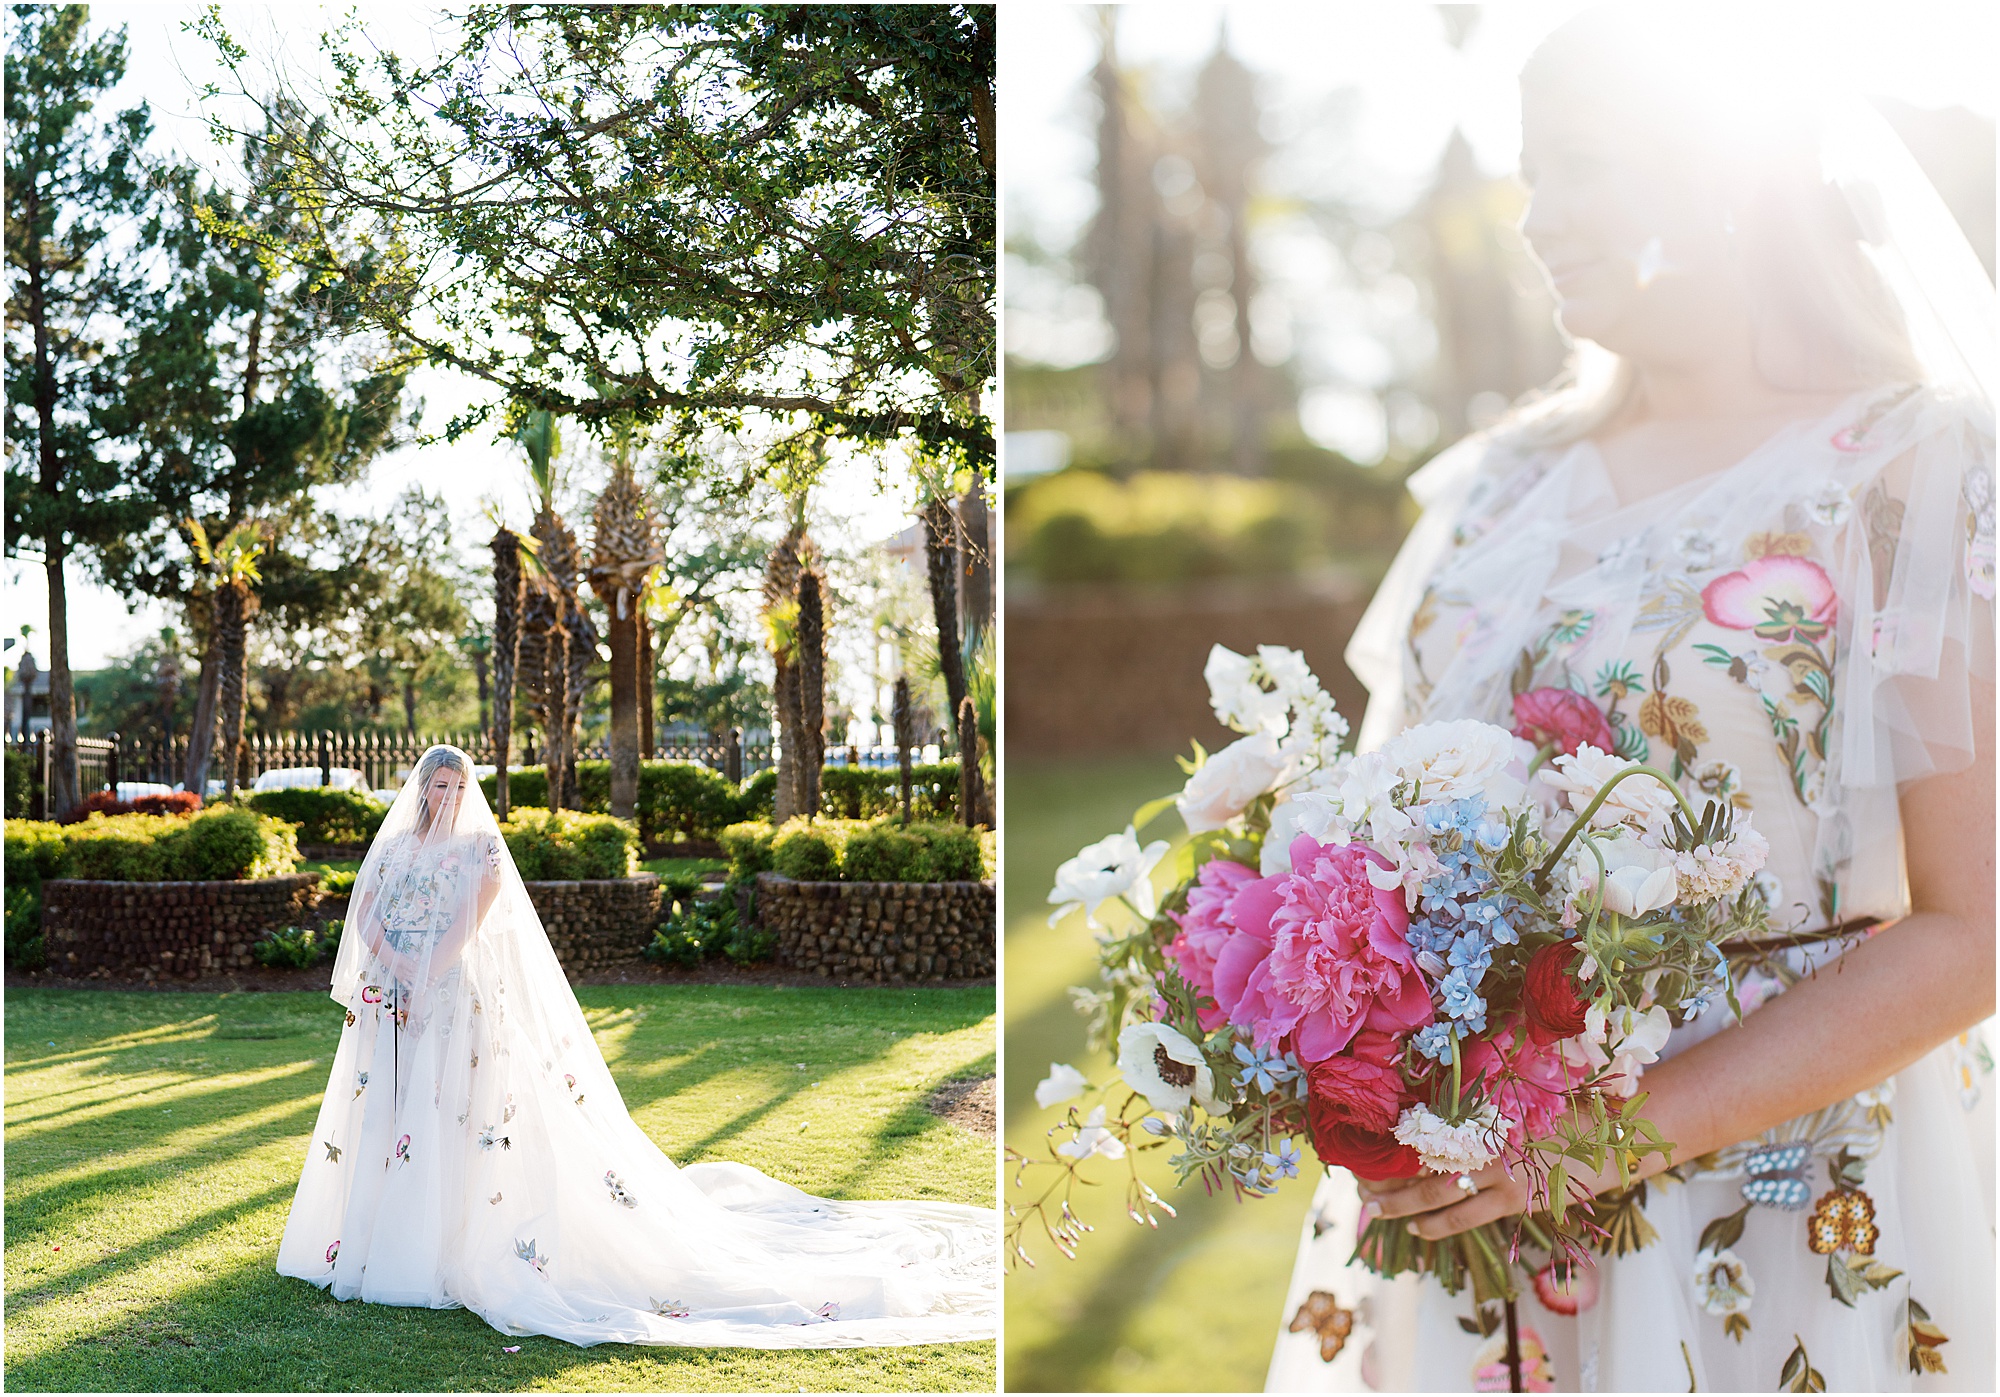 Bride in Monique Lhuillier with colorful flowers and butterfllies in the sunshine.